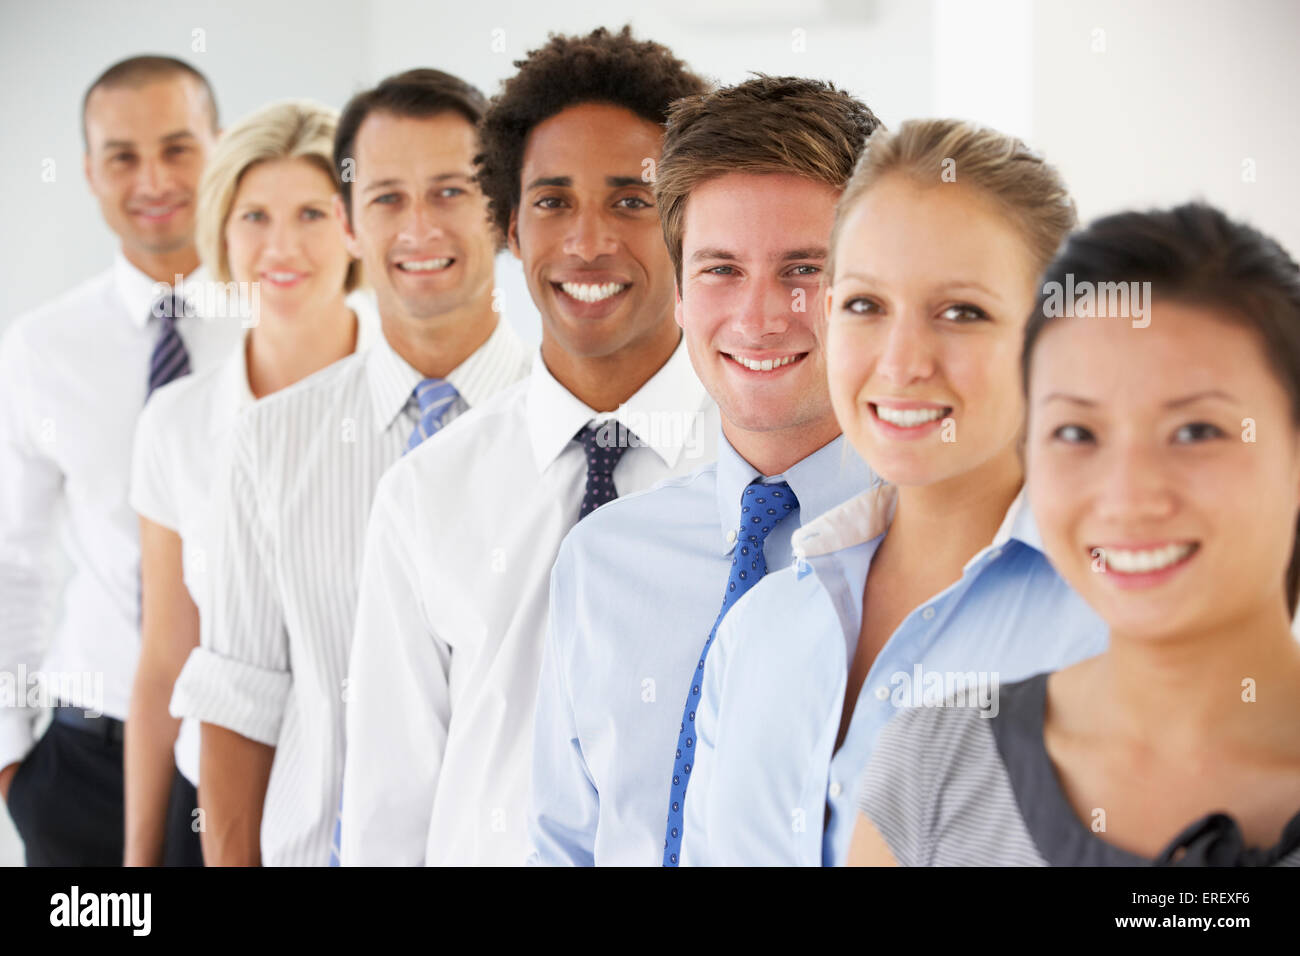 Line Of Happy And Positive Business People Stock Photo